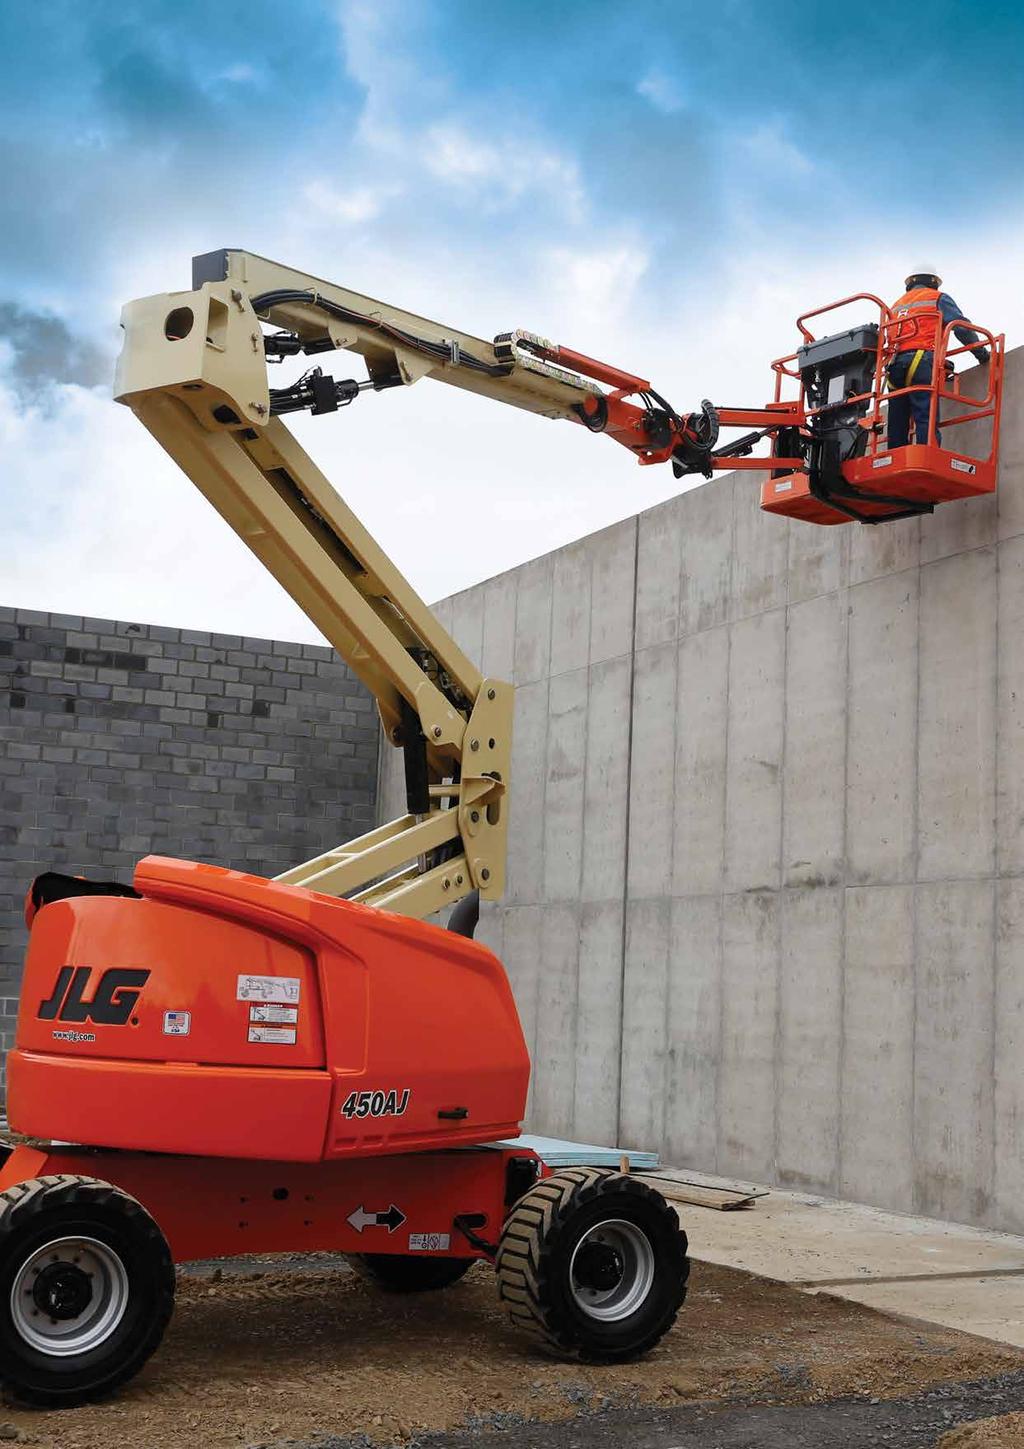 INTRODUCING THE NEW 450AJ BOOM LIFT Rugged, high performing articulating boom with industry leading work envelope, capacity, and lift speeds.